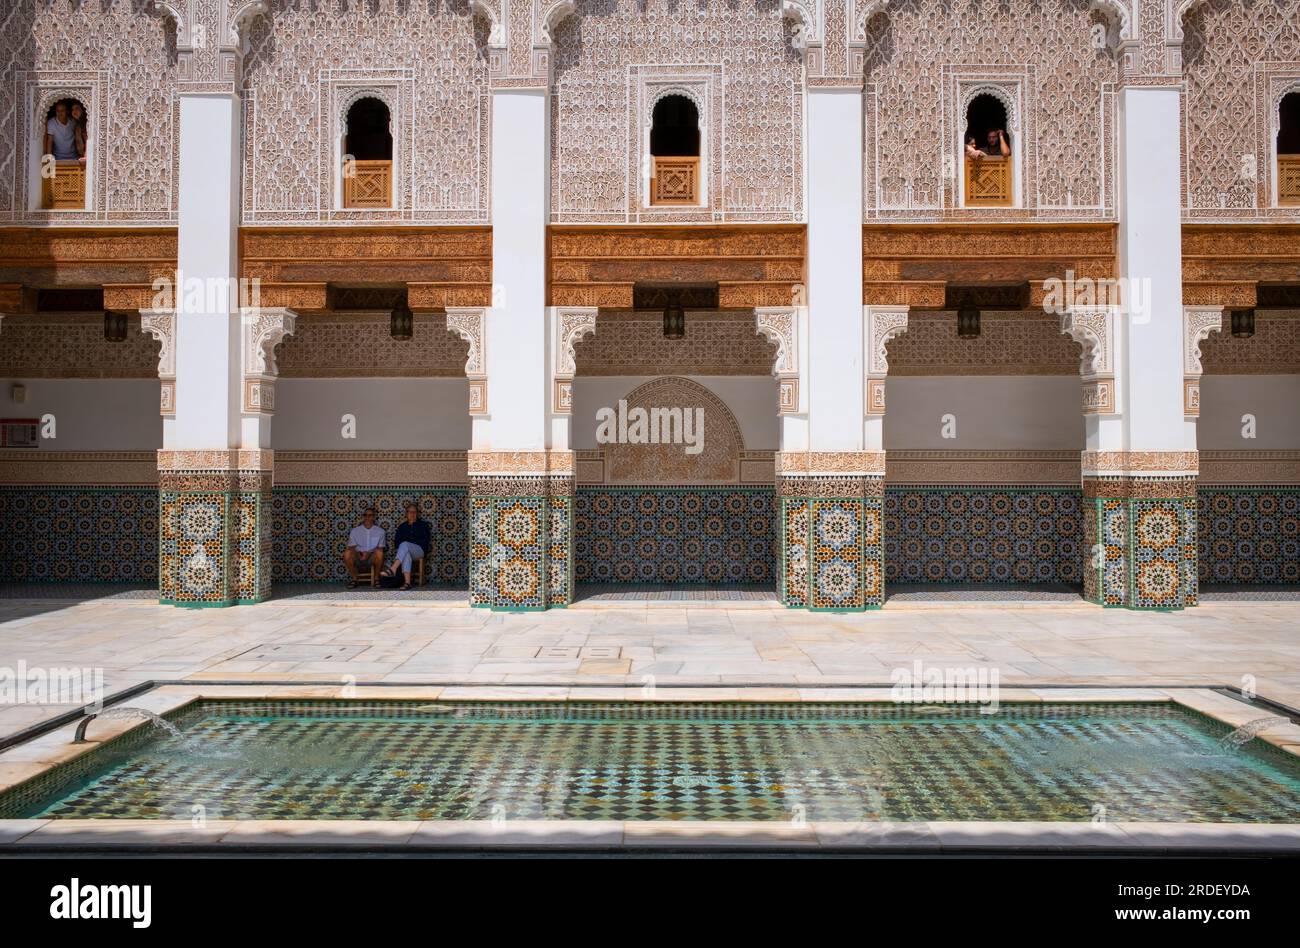 Morocco: Main courtyard and gallery with its reflective pool, Ben Youssef Madrasa (Medersa Ben Youssef), Medina of Marrakesh, Marrakesh. The Saadian Dynasty sultan, Abdallah al-Ghalib Billah (1517 - 1574), built the madrasa in 1565 (972 AH). It was once the largest Islamic college in the Maghreb (Northwest Africa). Stock Photo